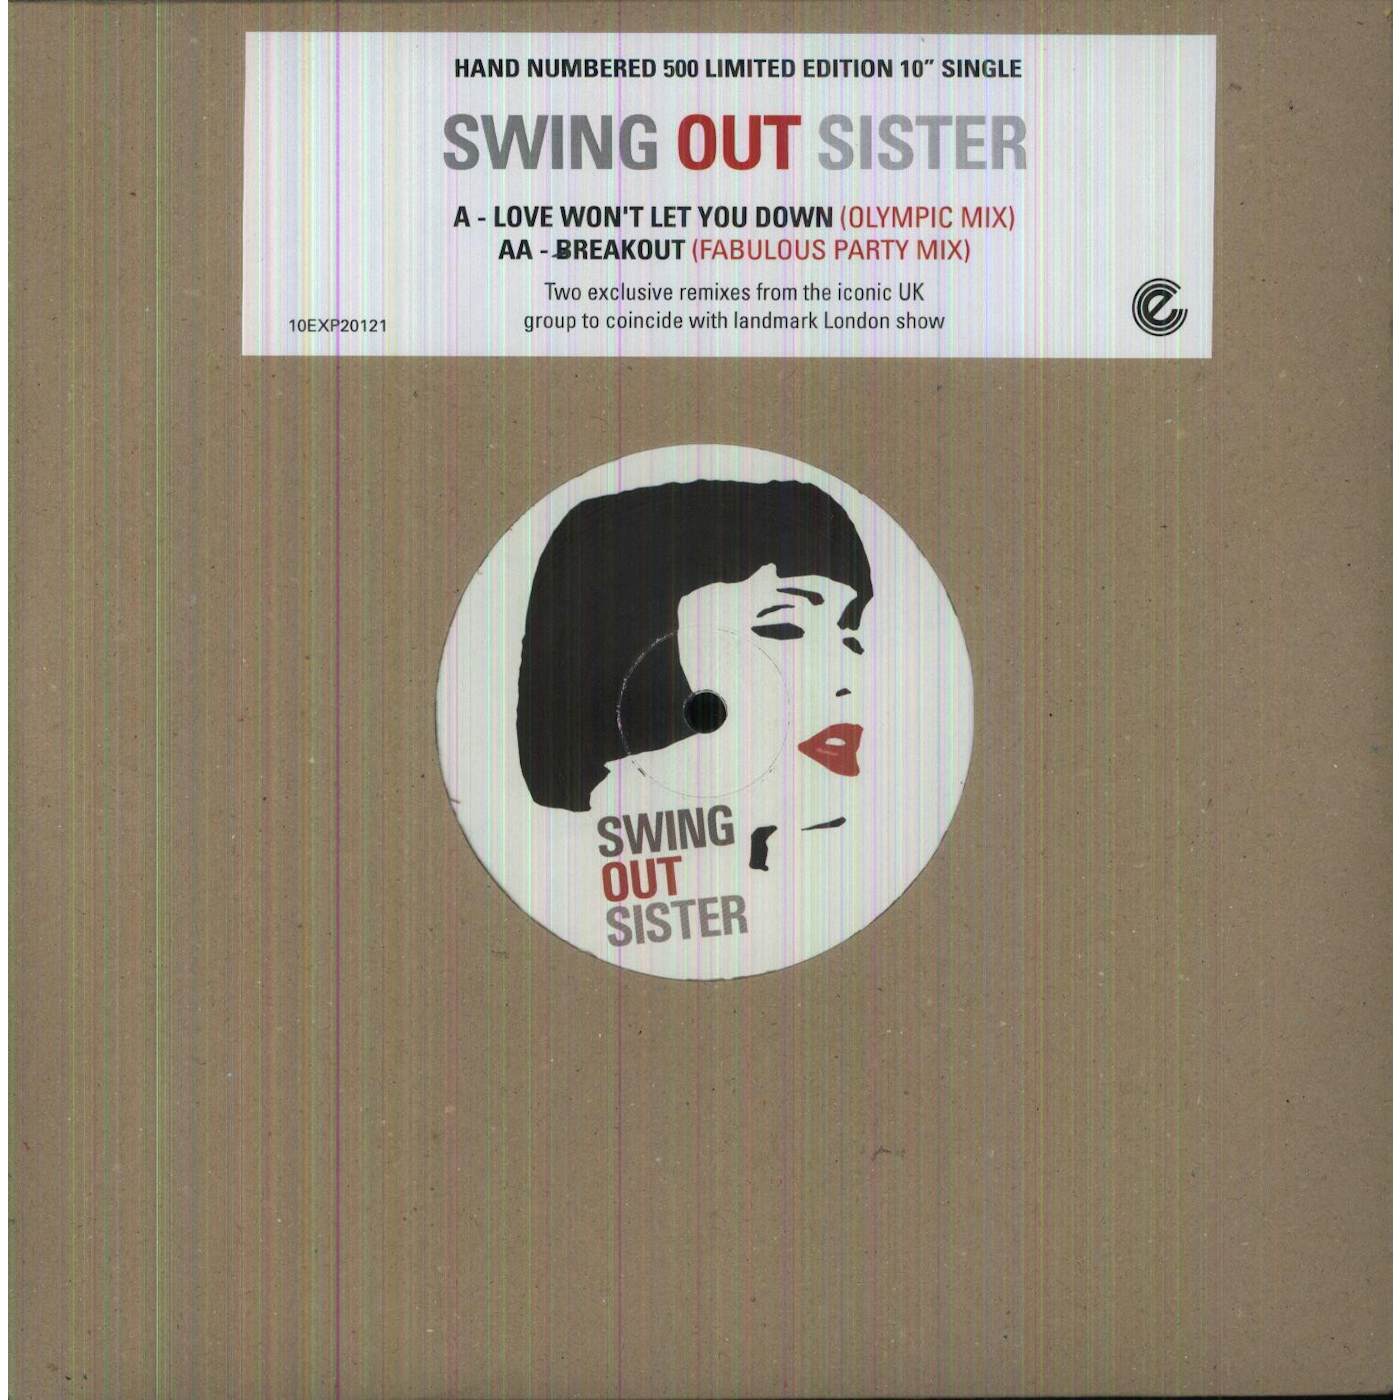 Swing Out Sister LOVE WON'T LET ME DOWN Vinyl Record - 10 Inch Single, UK Release